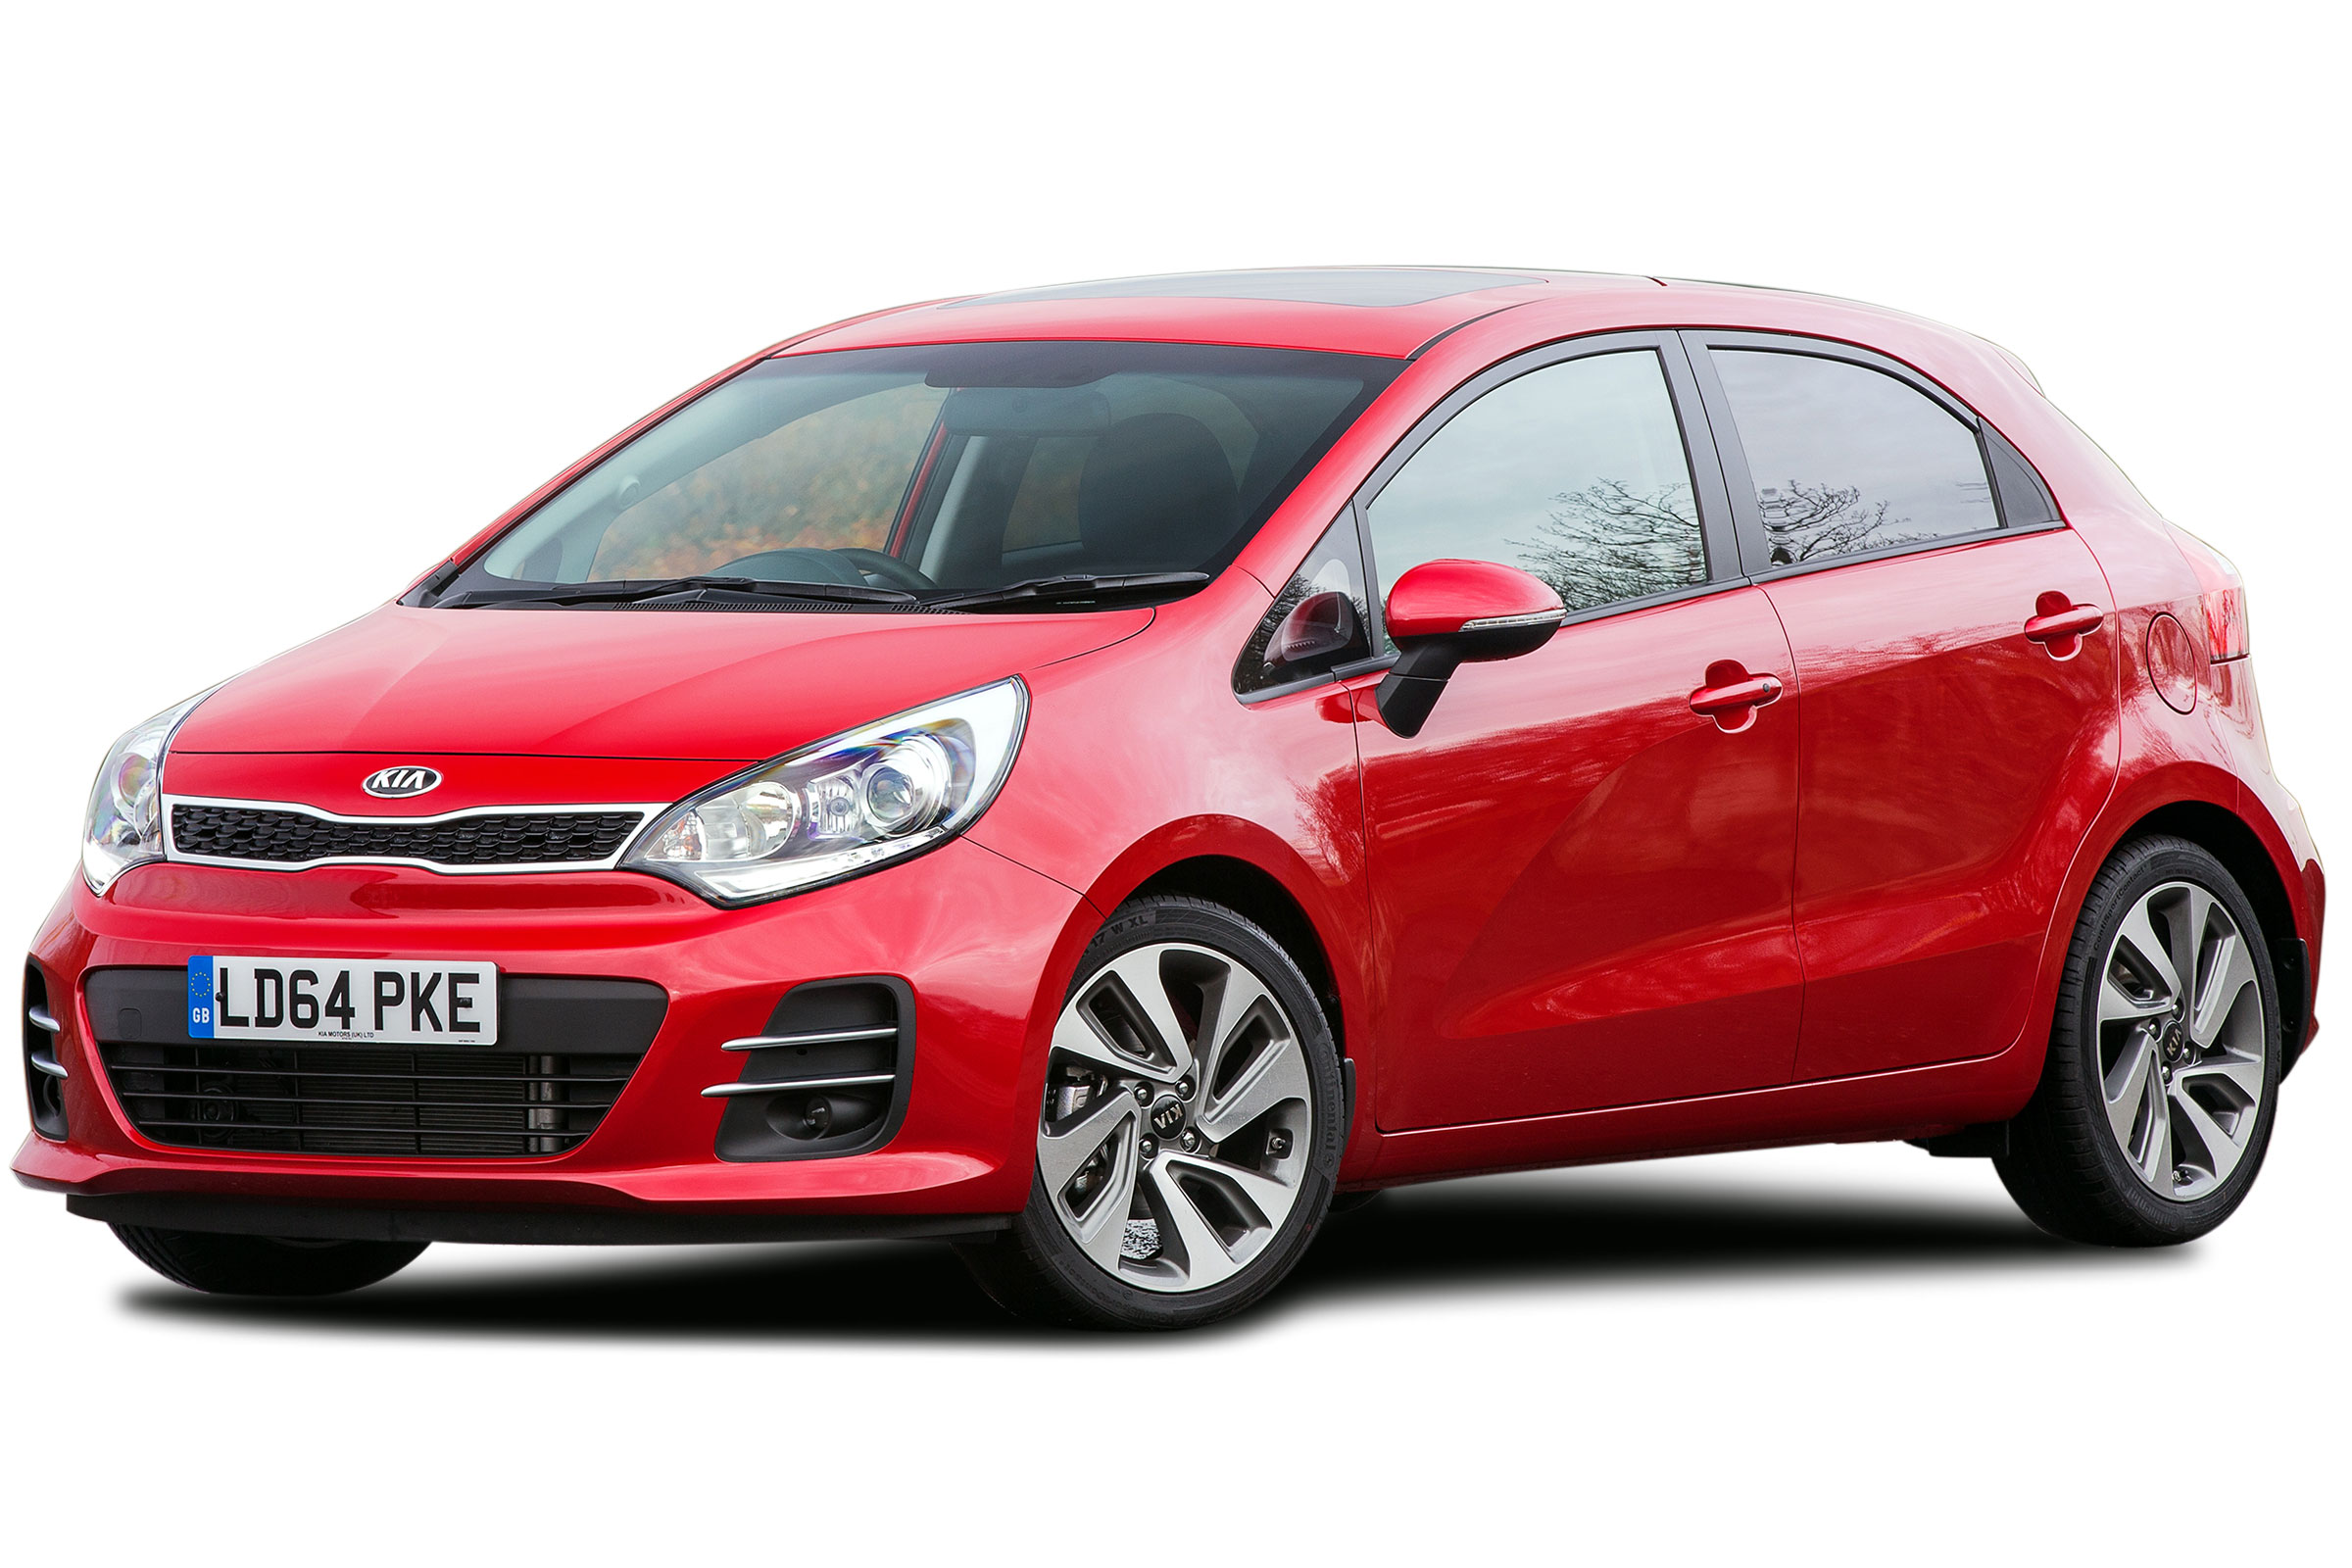 Kia Rio Hatchback 11 17 Owner Reviews Mpg Problems Reliability Carbuyer